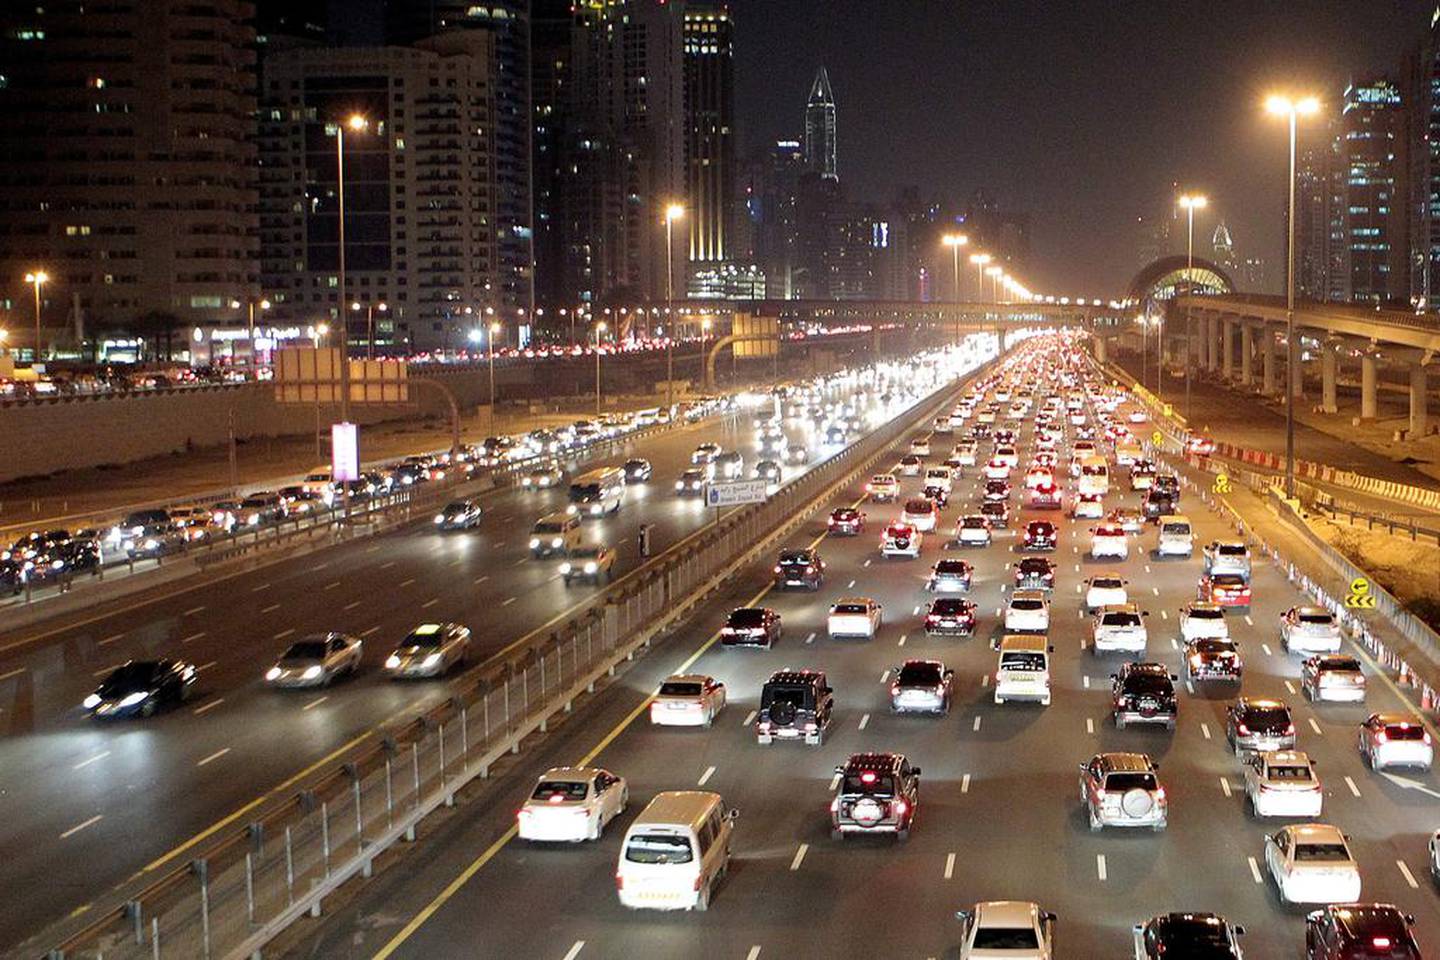 Commuters in Dubai spent an average of 80 hours stuck in traffic in 2018. Jeffrey E Biteng / The National